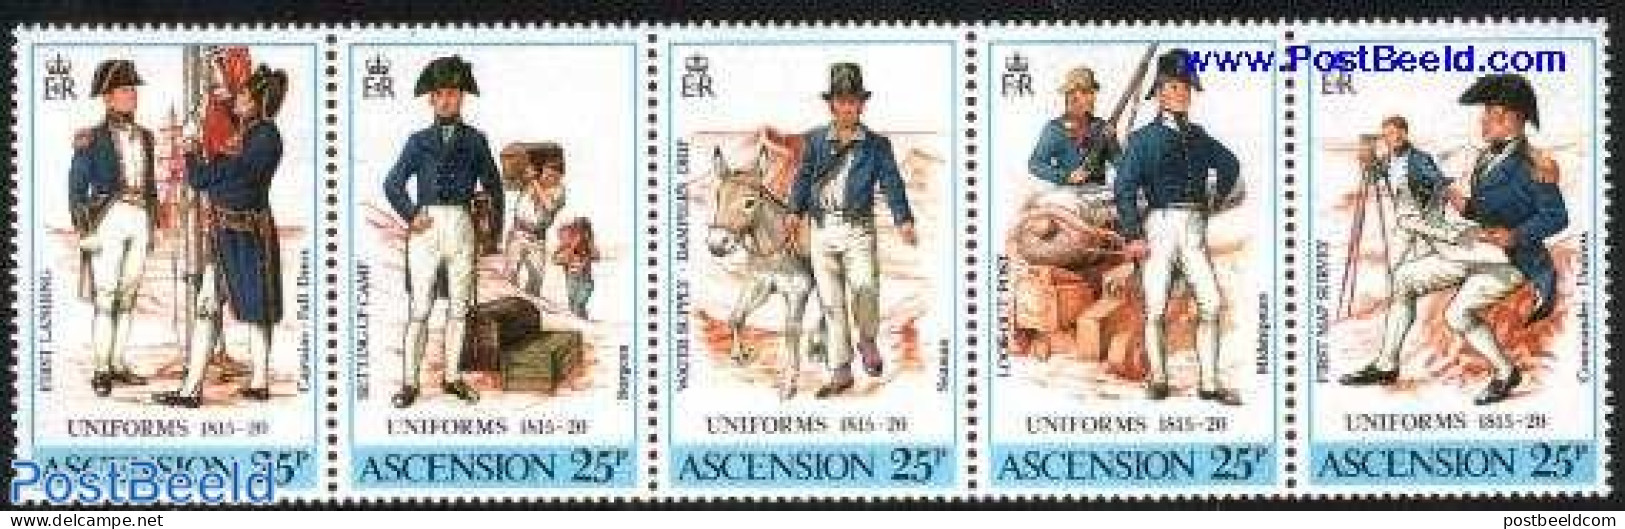 Ascension 1987 Royal Navy Uniforms 5v [::::], Mint NH, Science - Various - Weights & Measures - Uniforms - Costumes